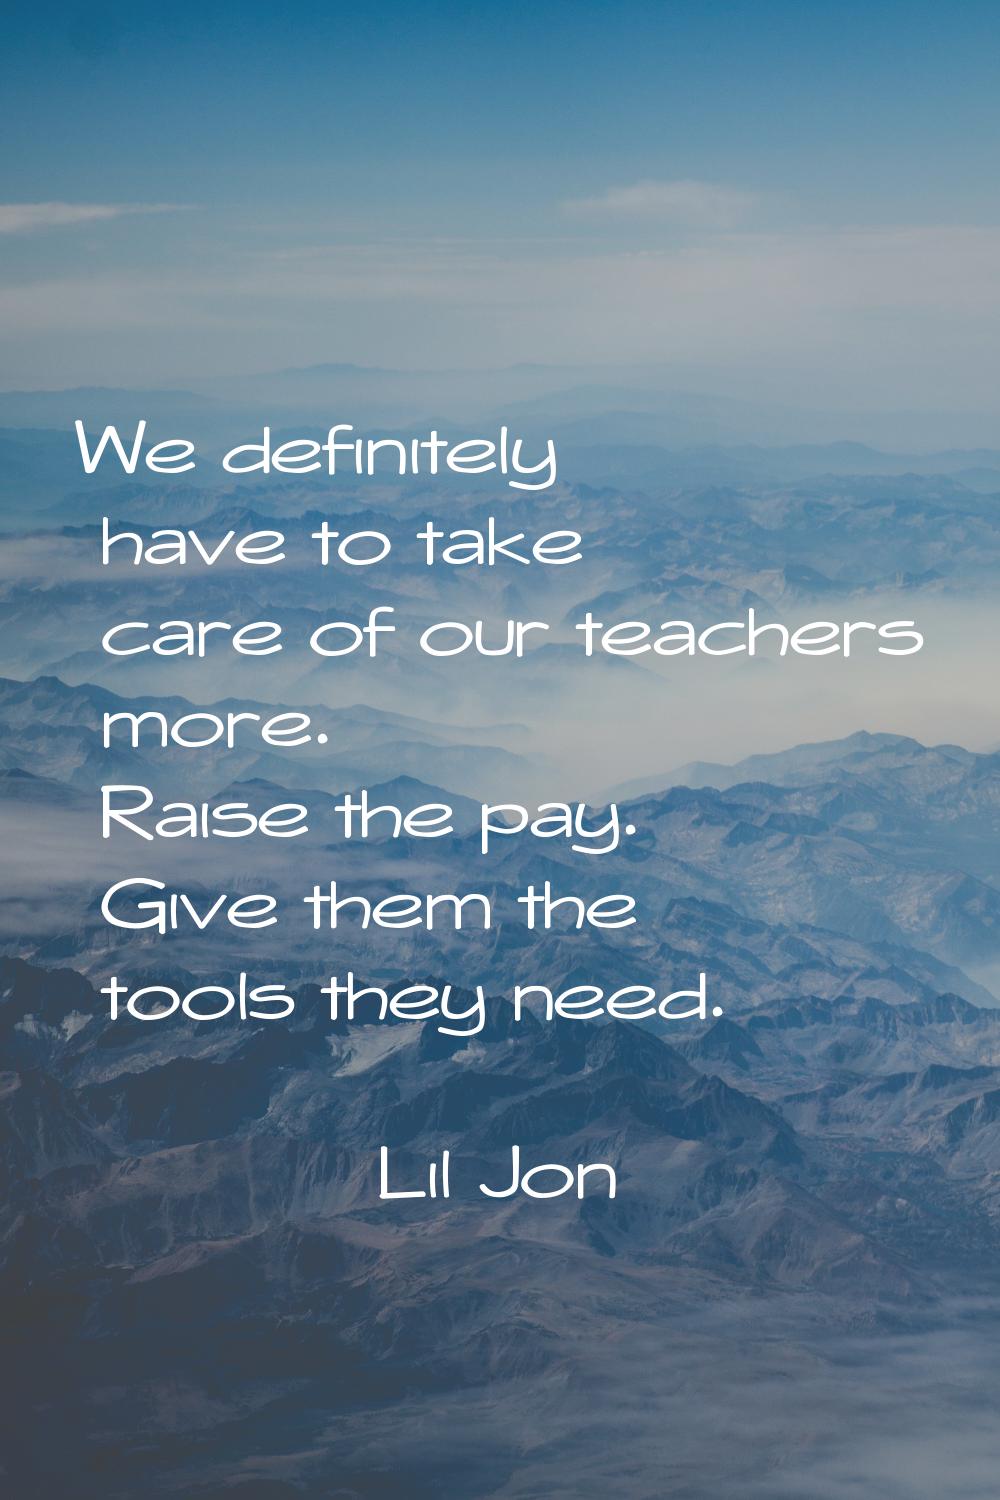 We definitely have to take care of our teachers more. Raise the pay. Give them the tools they need.